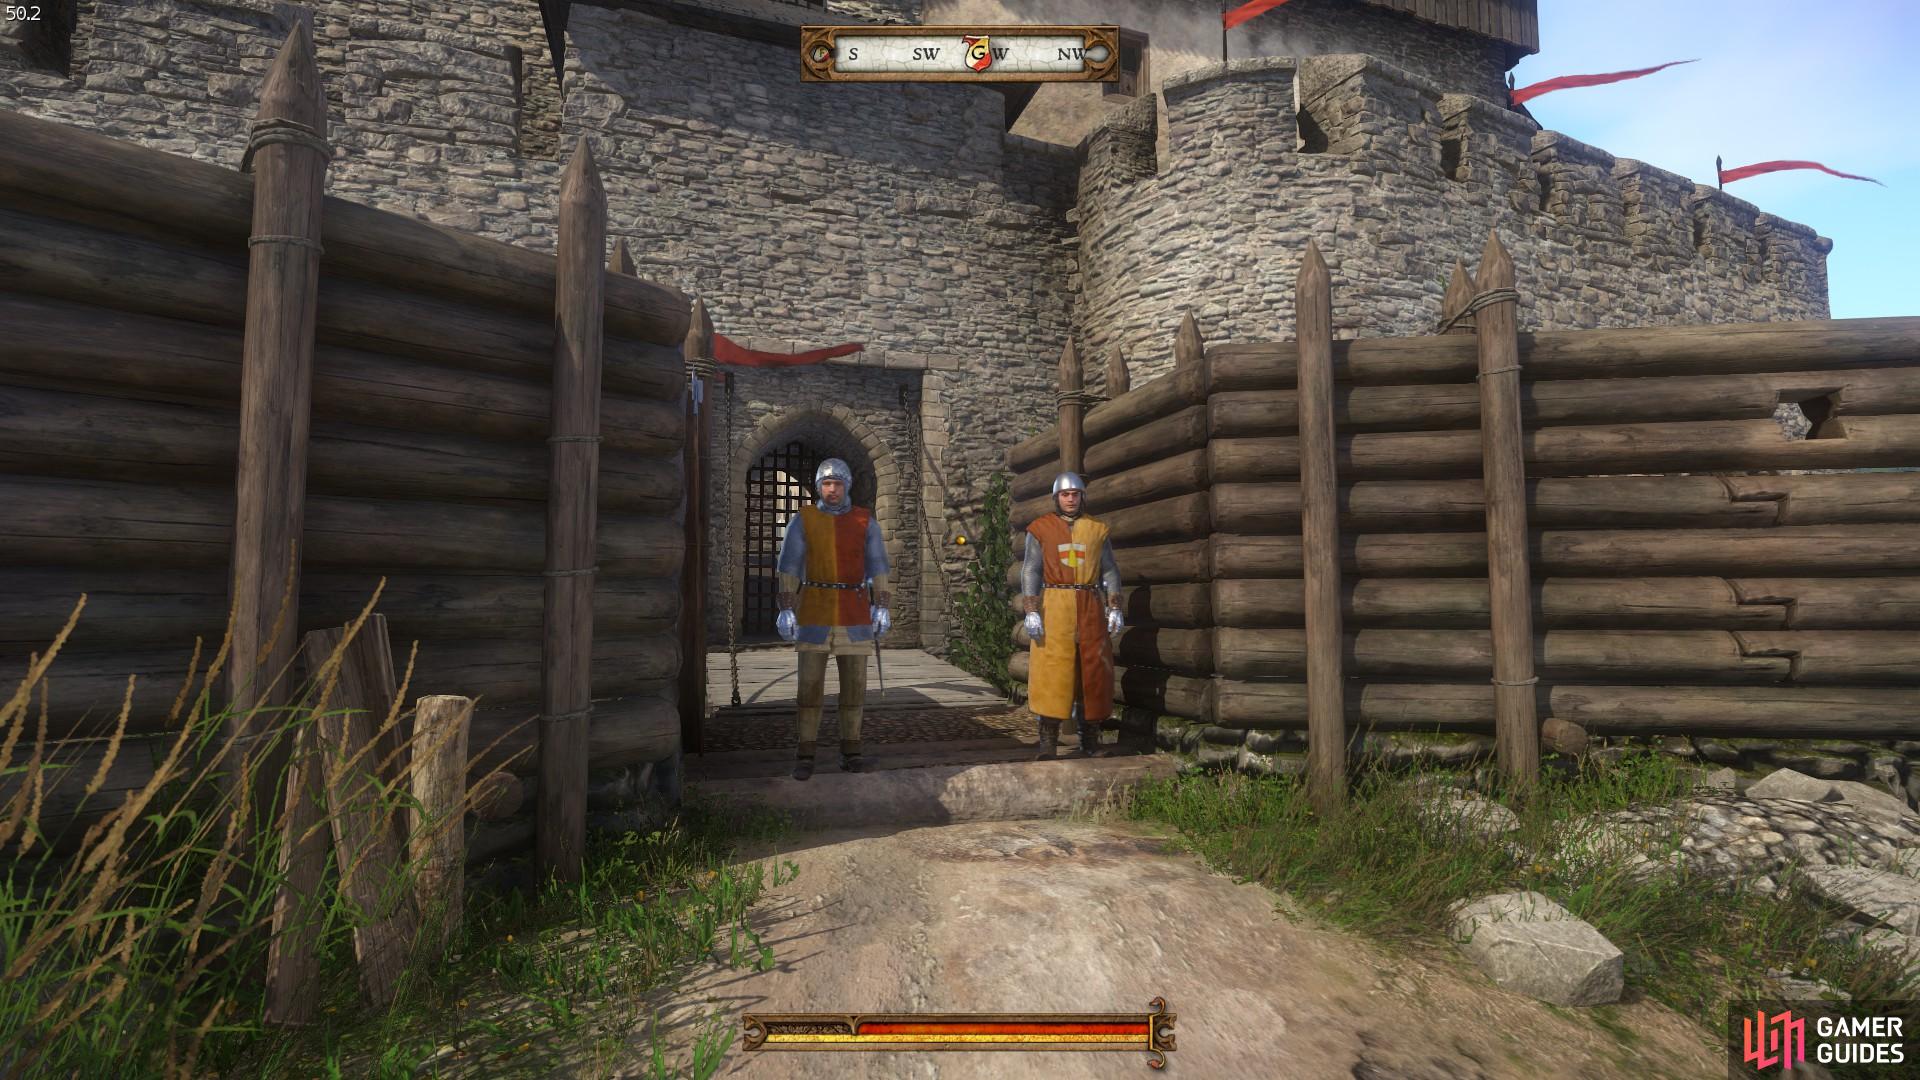 Speak to the guards to pick up the cross-guard for Sir Radzig’s sword.